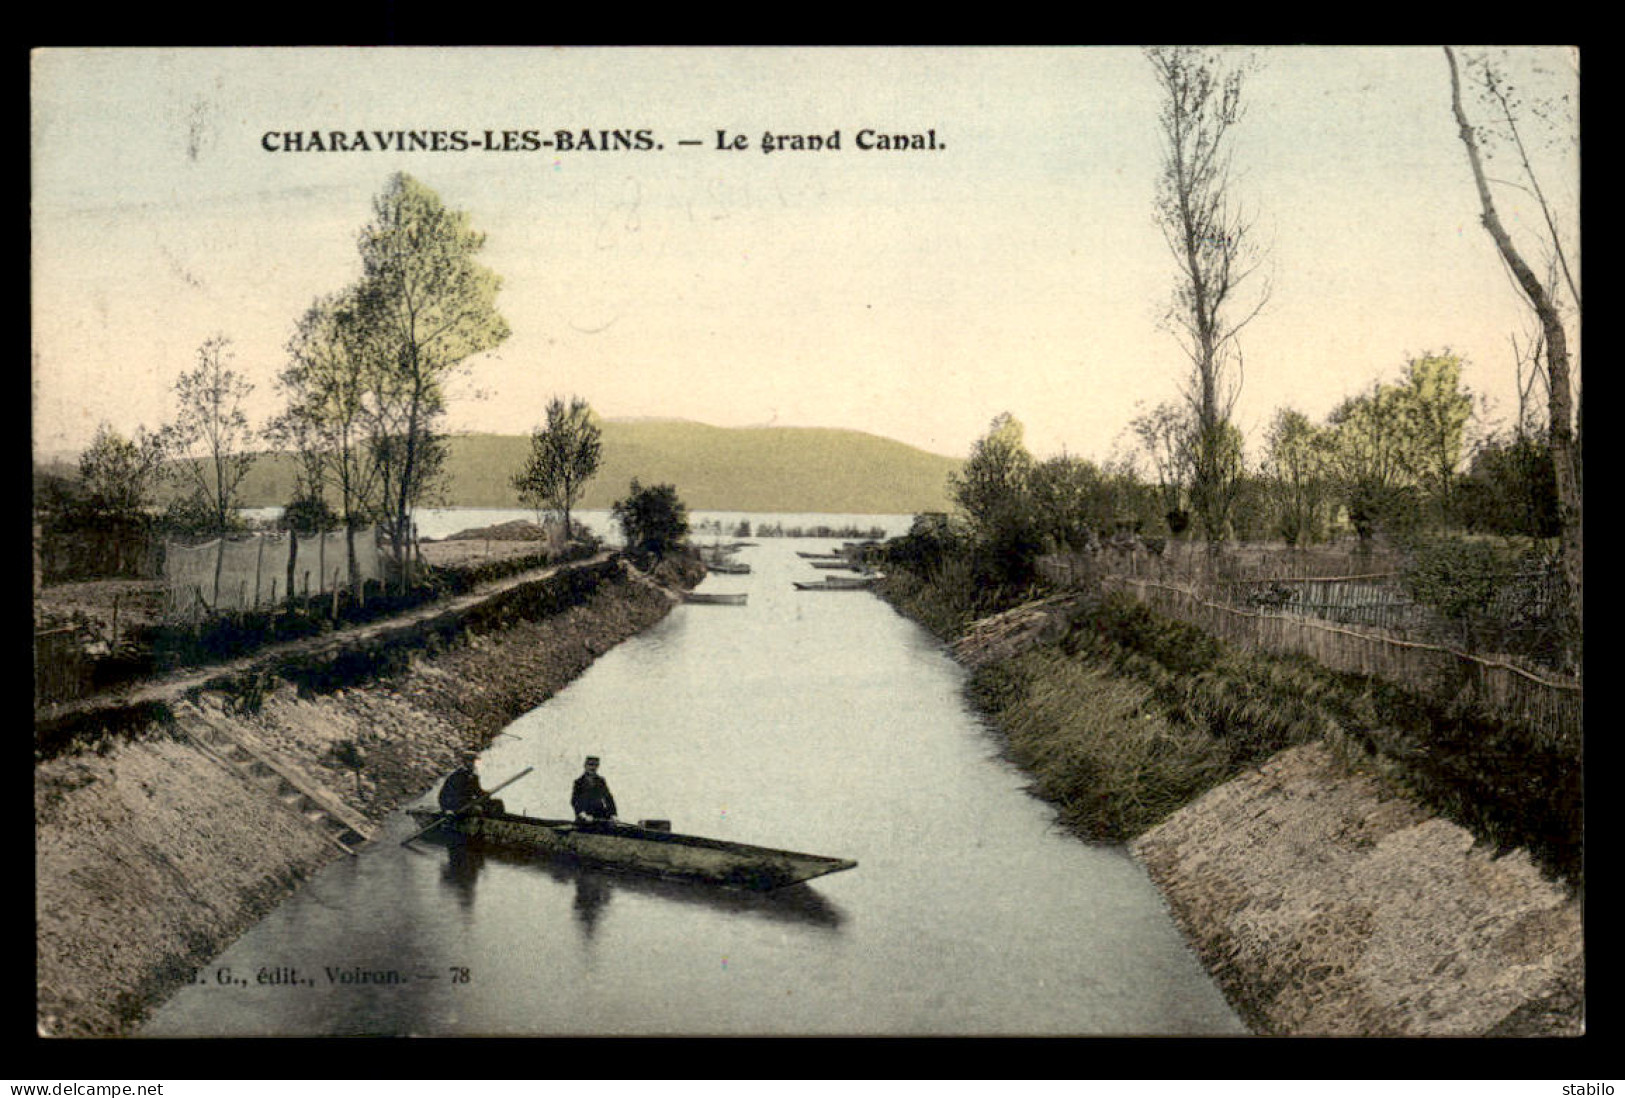 38 - CHARAVINES-LES-BAINS - LE GRAND CANAL - Charavines